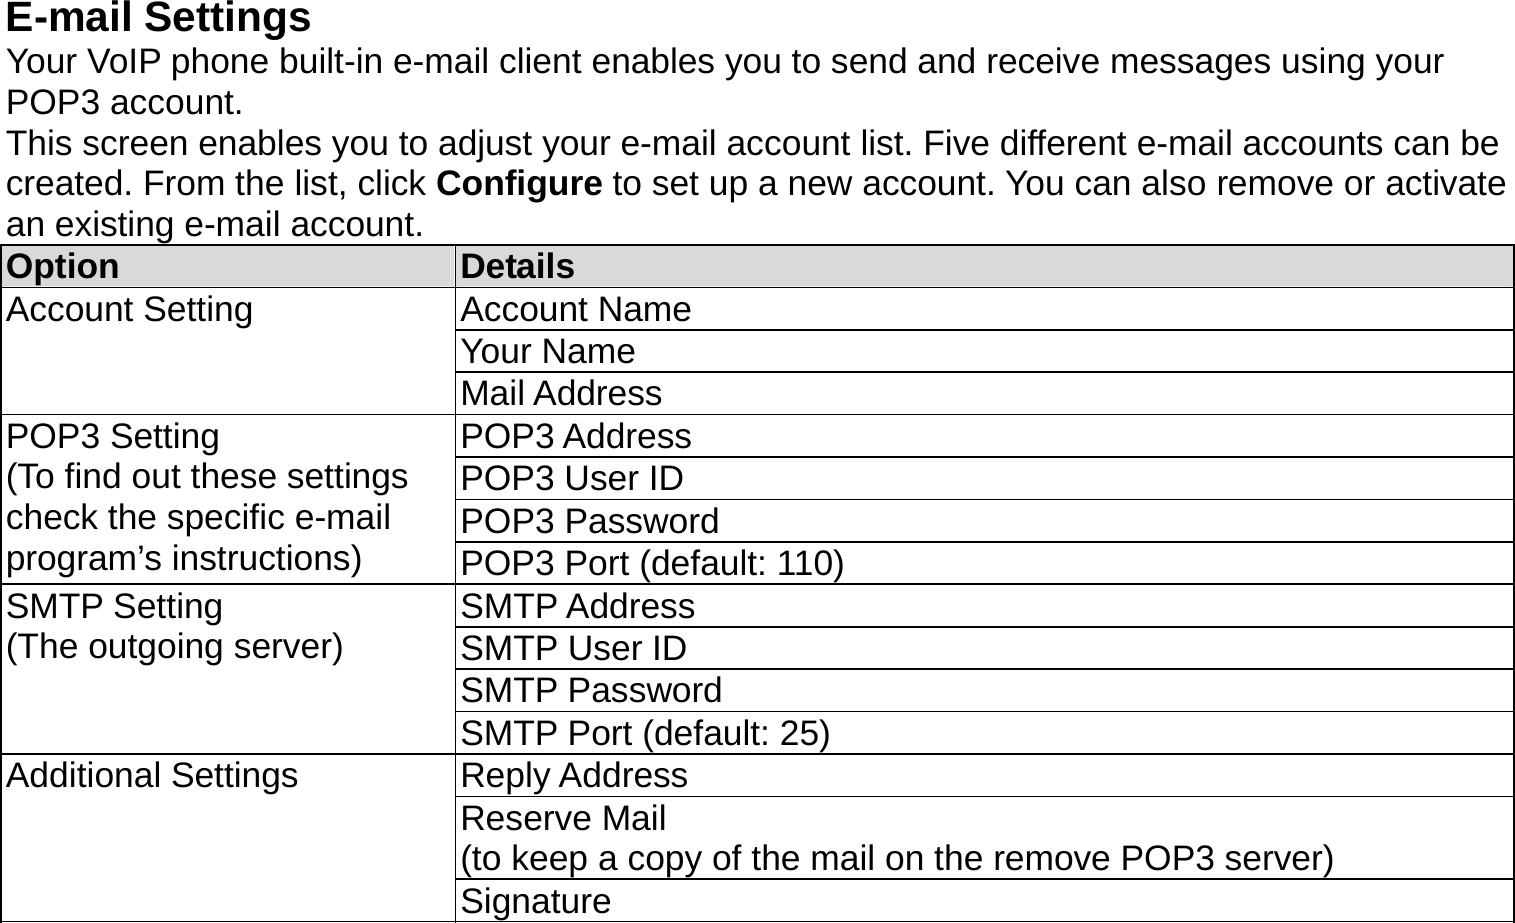 E-mail Settings Your VoIP phone built-in e-mail client enables you to send and receive messages using your POP3 account. This screen enables you to adjust your e-mail account list. Five different e-mail accounts can be created. From the list, click Configure to set up a new account. You can also remove or activate an existing e-mail account.   Option  Details Account Name Your Name Account Setting Mail Address POP3 Address POP3 User ID POP3 Password POP3 Setting (To find out these settings check the specific e-mail program’s instructions)  POP3 Port (default: 110) SMTP Address SMTP User ID SMTP Password SMTP Setting (The outgoing server) SMTP Port (default: 25) Reply Address Reserve Mail   (to keep a copy of the mail on the remove POP3 server) Additional Settings Signature  